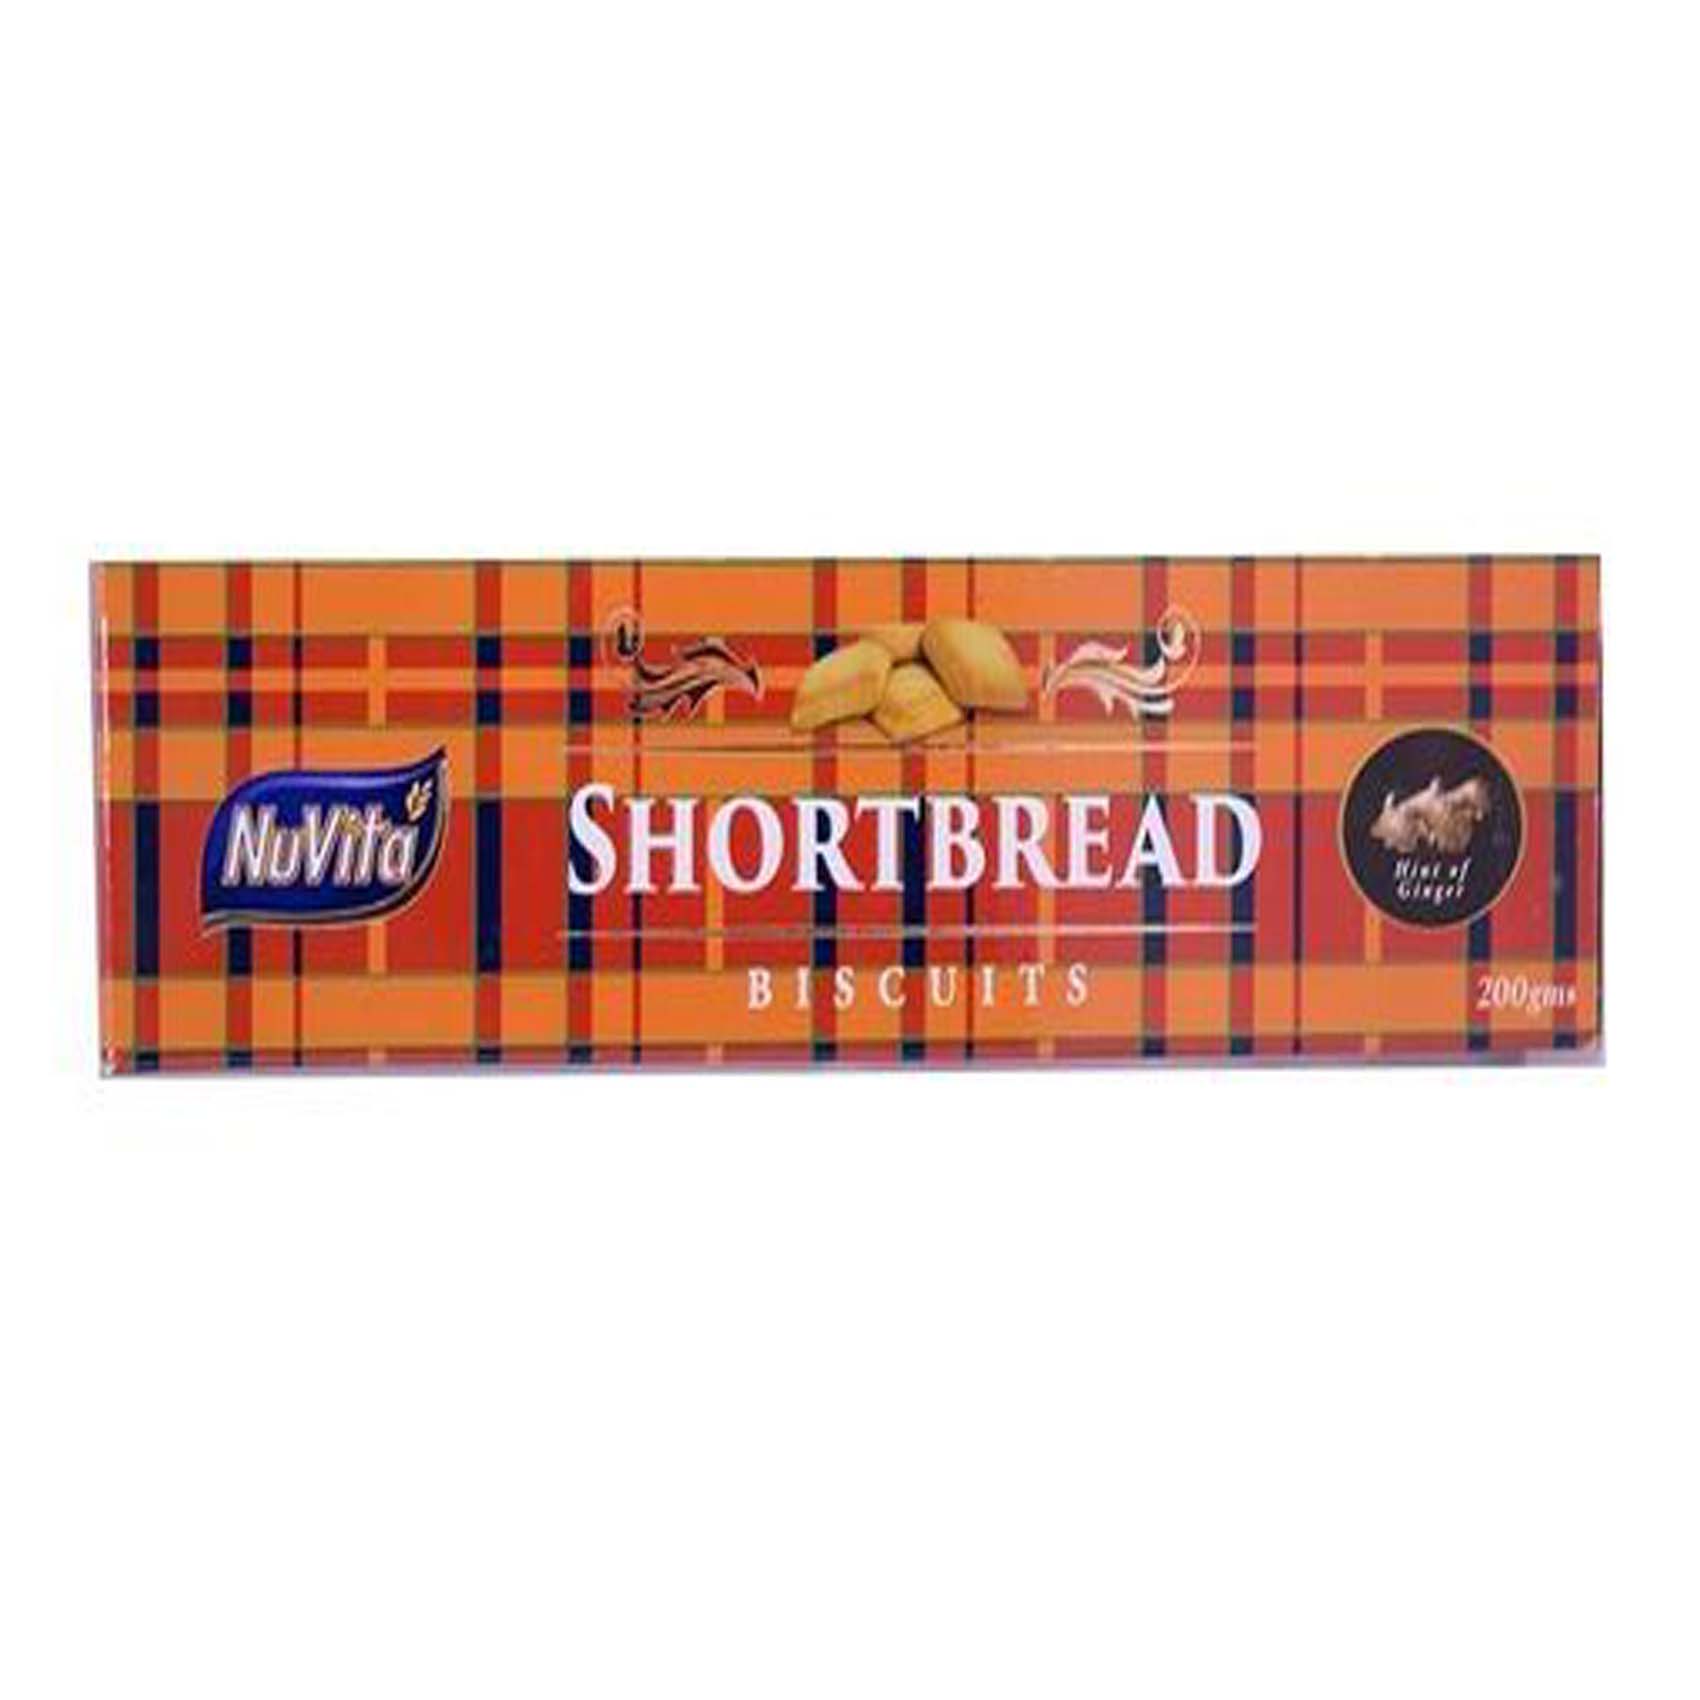 NuVita Shortbread ginger Biscuits 200g